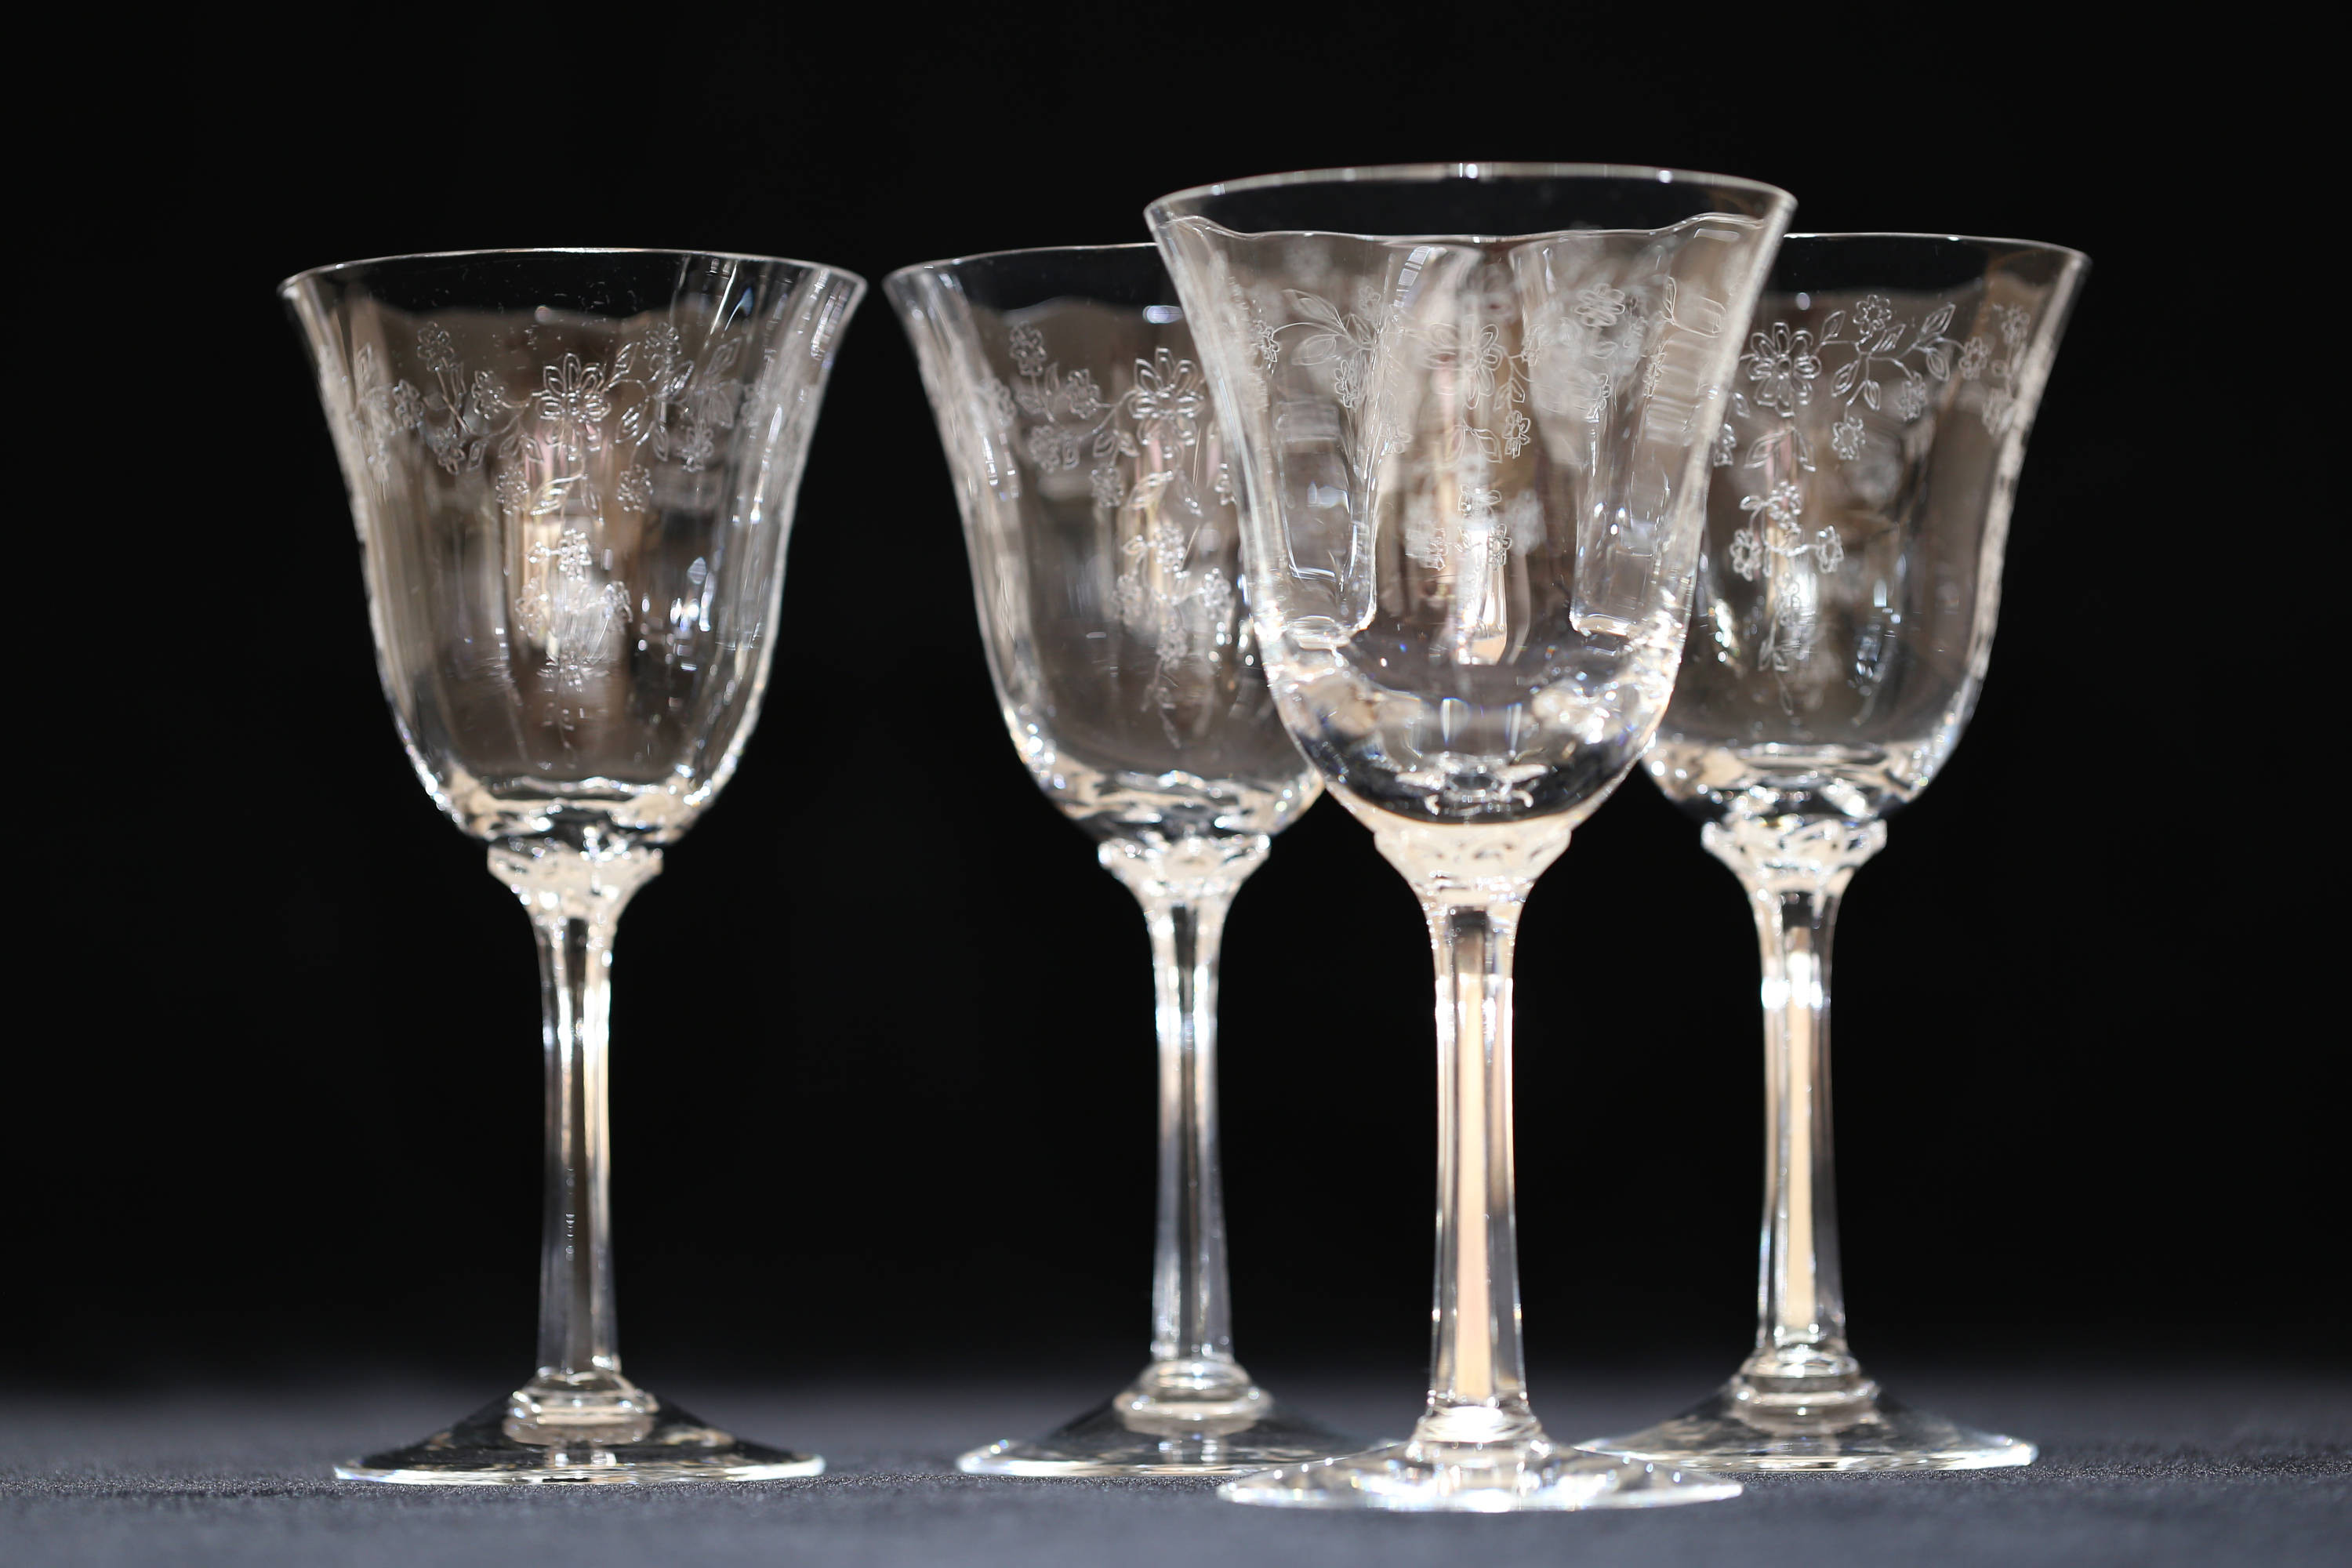 15 attractive Waterford Crystal Lismore Vase 8 2024 free download waterford crystal lismore vase 8 of vintage lenox crystal water goblet lenox castle garden with dc29fc294c28ezoom